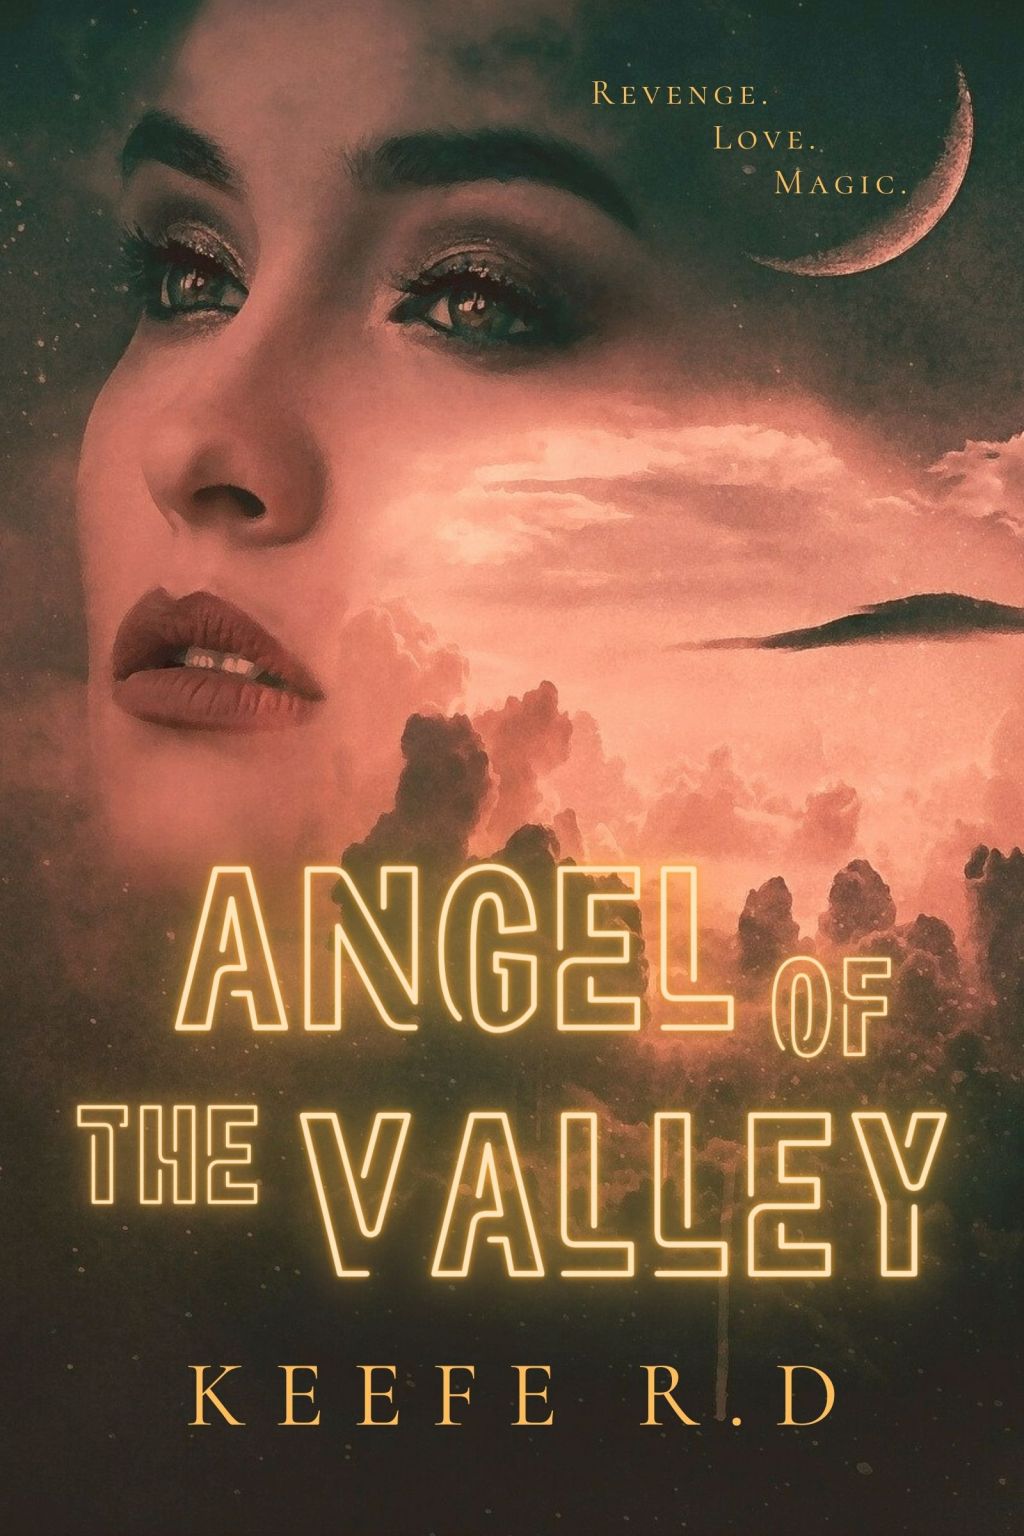 New Cover Re-touched for “Angel of the Valley”